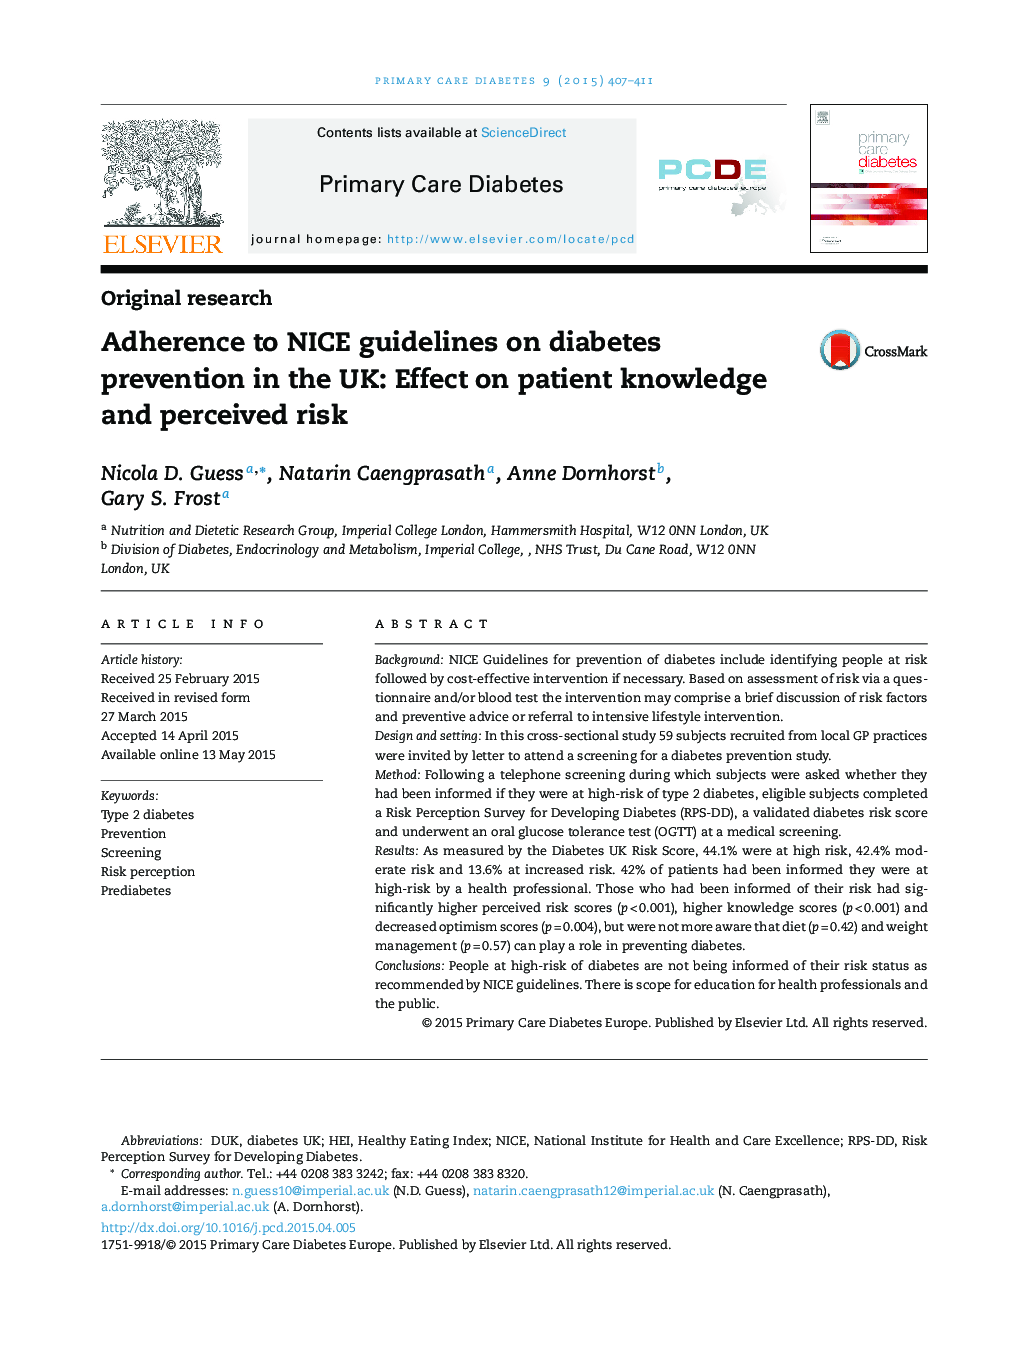 Adherence to NICE guidelines on diabetes prevention in the UK: Effect on patient knowledge and perceived risk